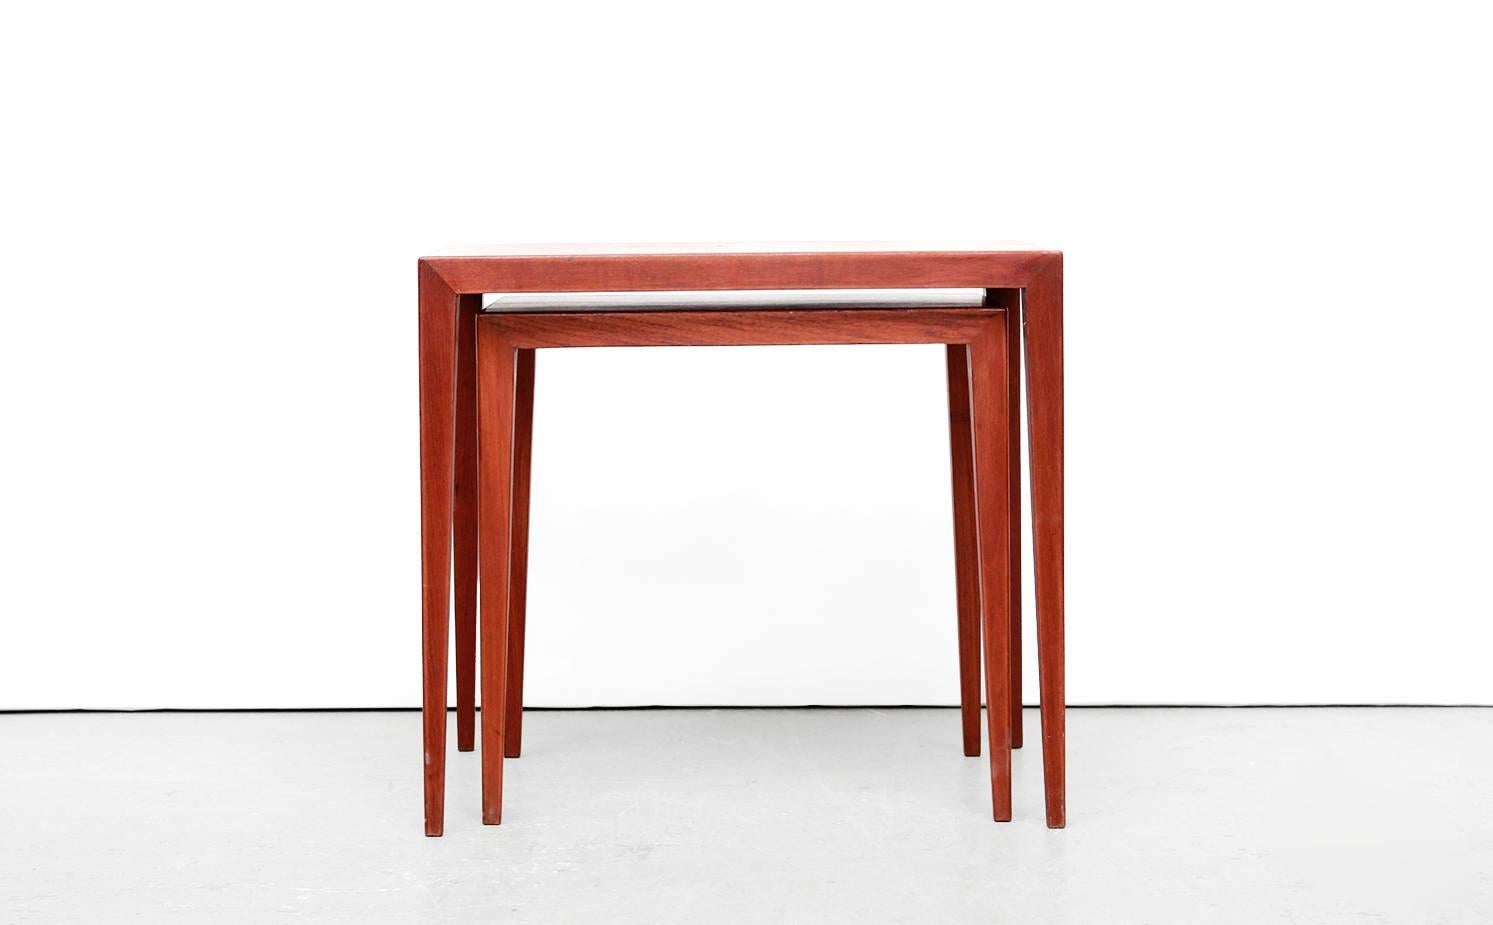 Nice set of side tables designed by Severin Hansen for Haslev Møbelfabrik in Denmark in the 1950s. This set is made of teak veneer and has lovely details. In particular the connection of the legs to the tabletop are a wonderful design.
Simple, but